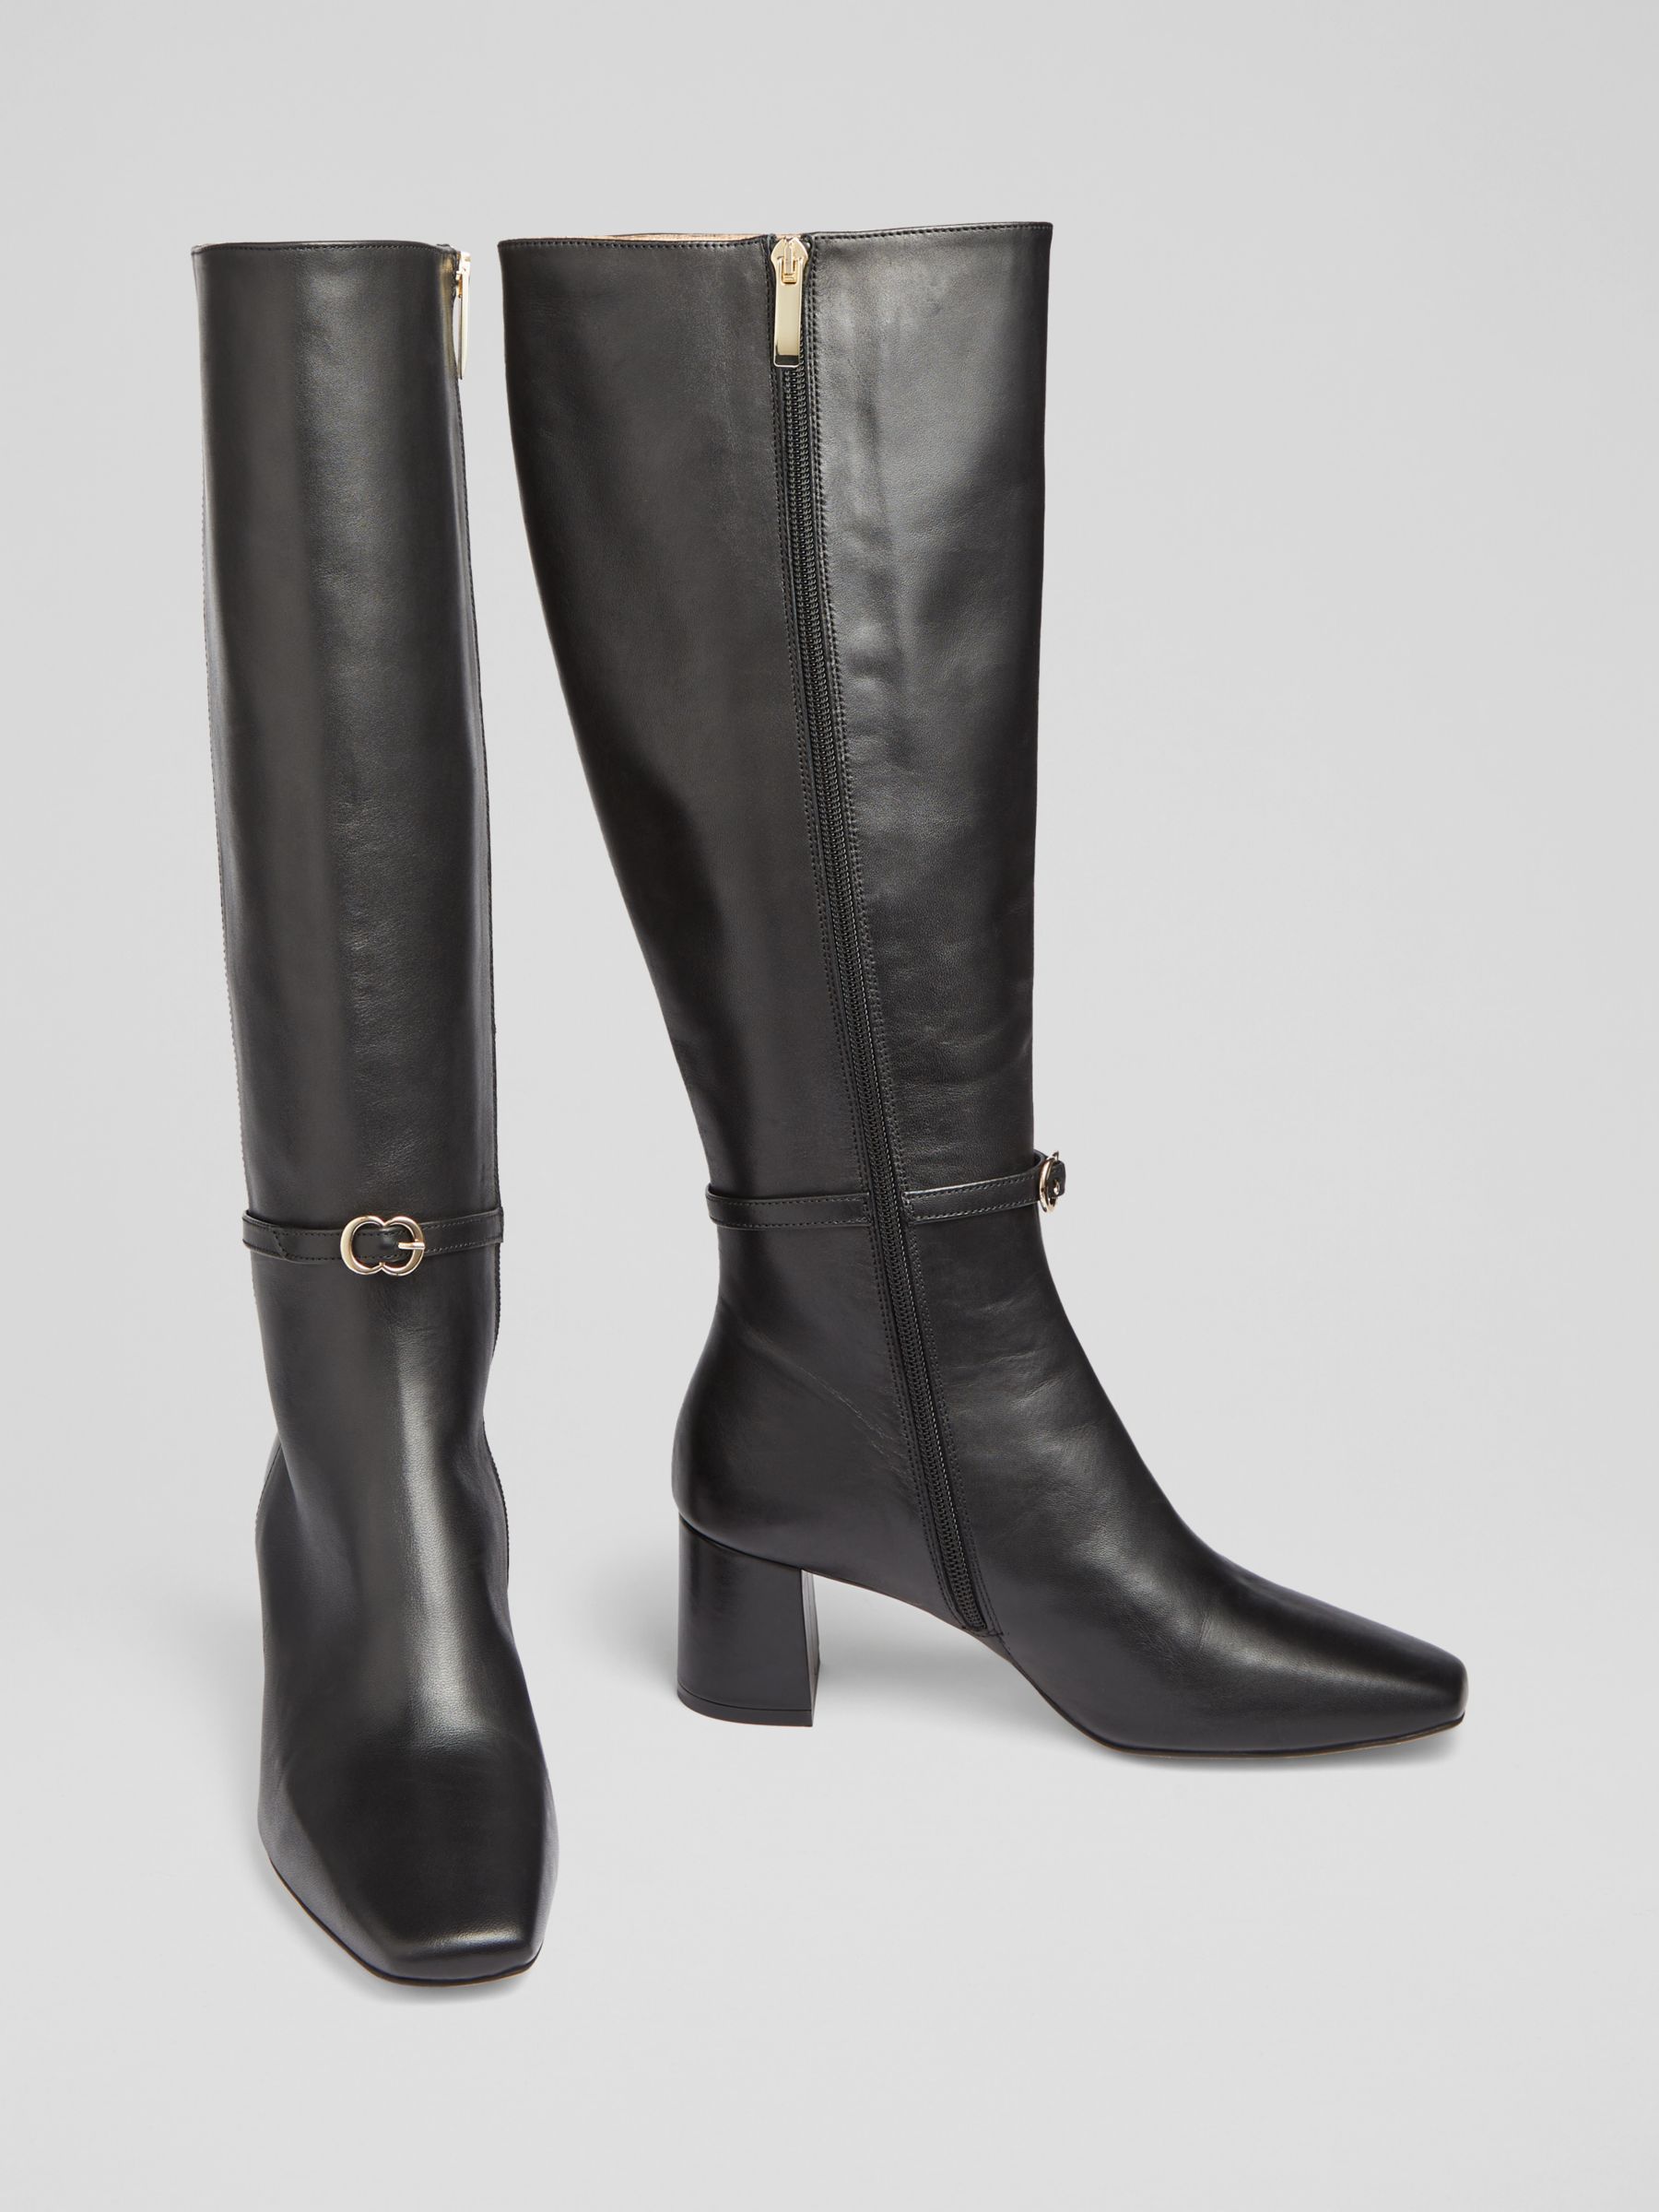 L.K.Bennett x Ascot Collection: Sylvia Leather Knee High Boots, Black, 6